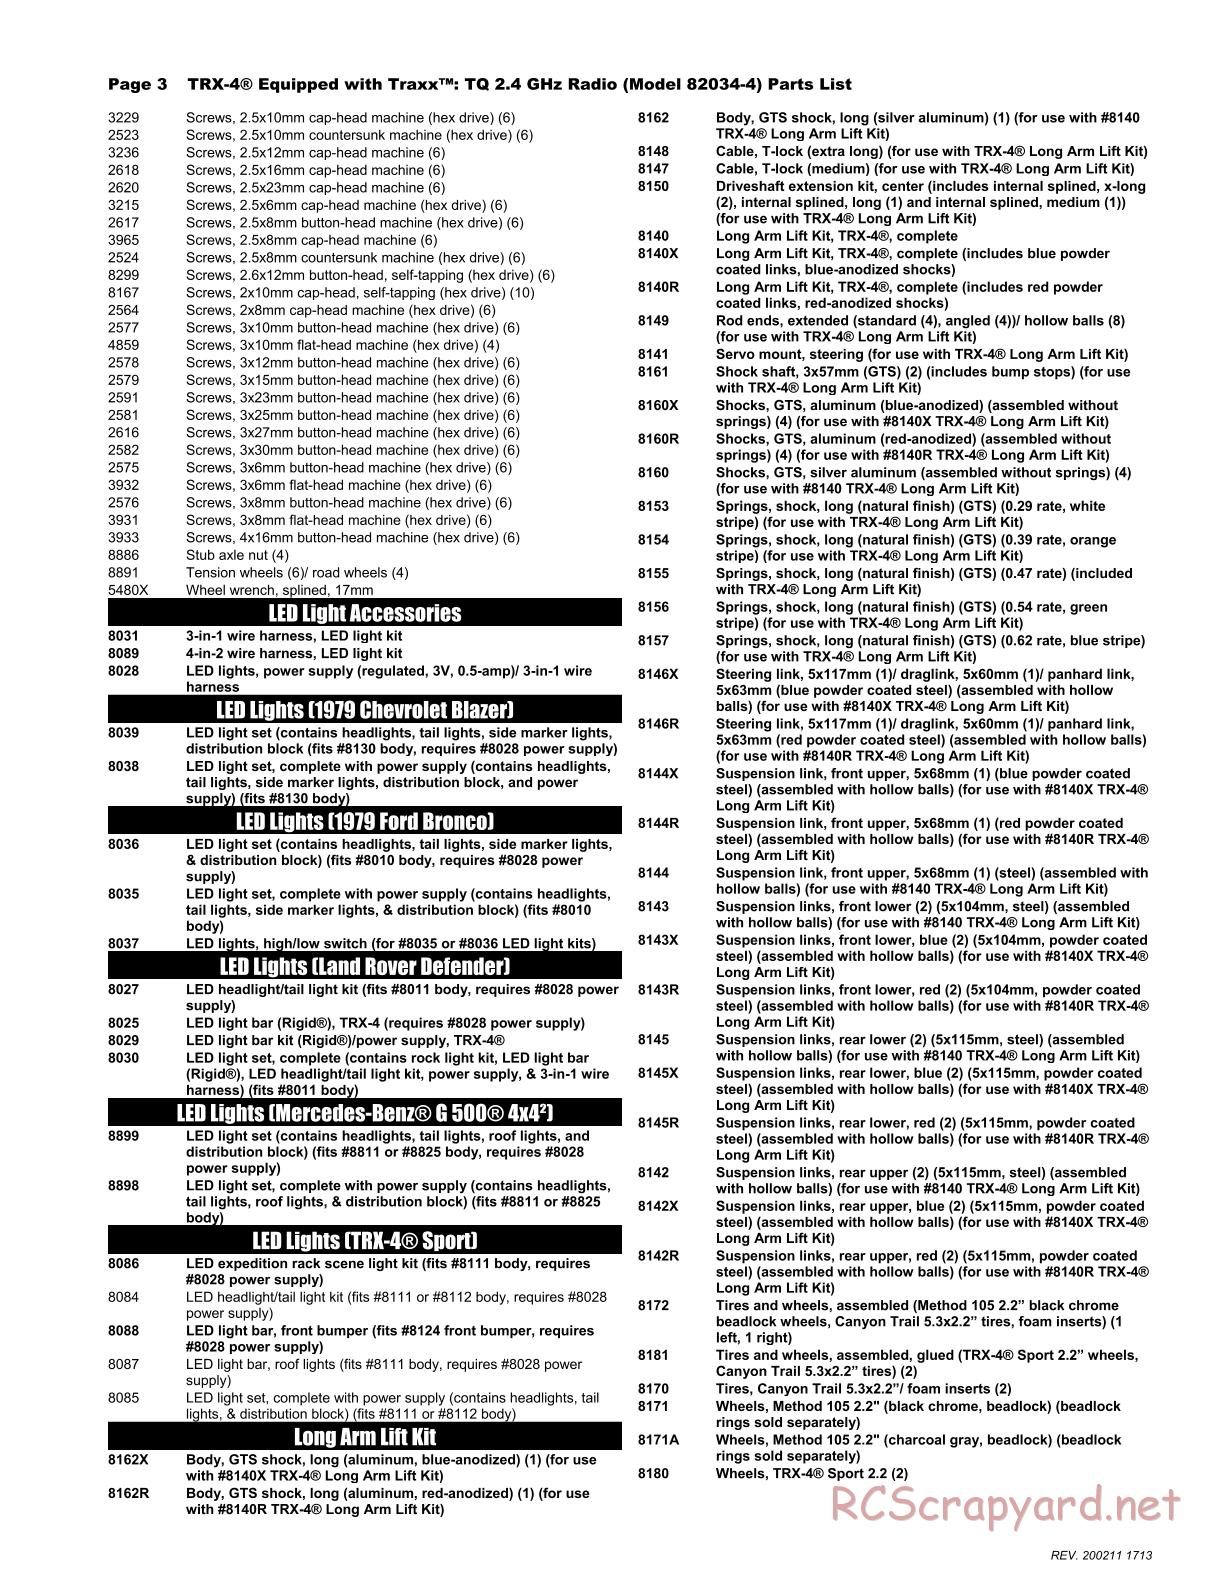 Traxxas - TRX-4 Equipped with Traxx - Parts List - Page 3